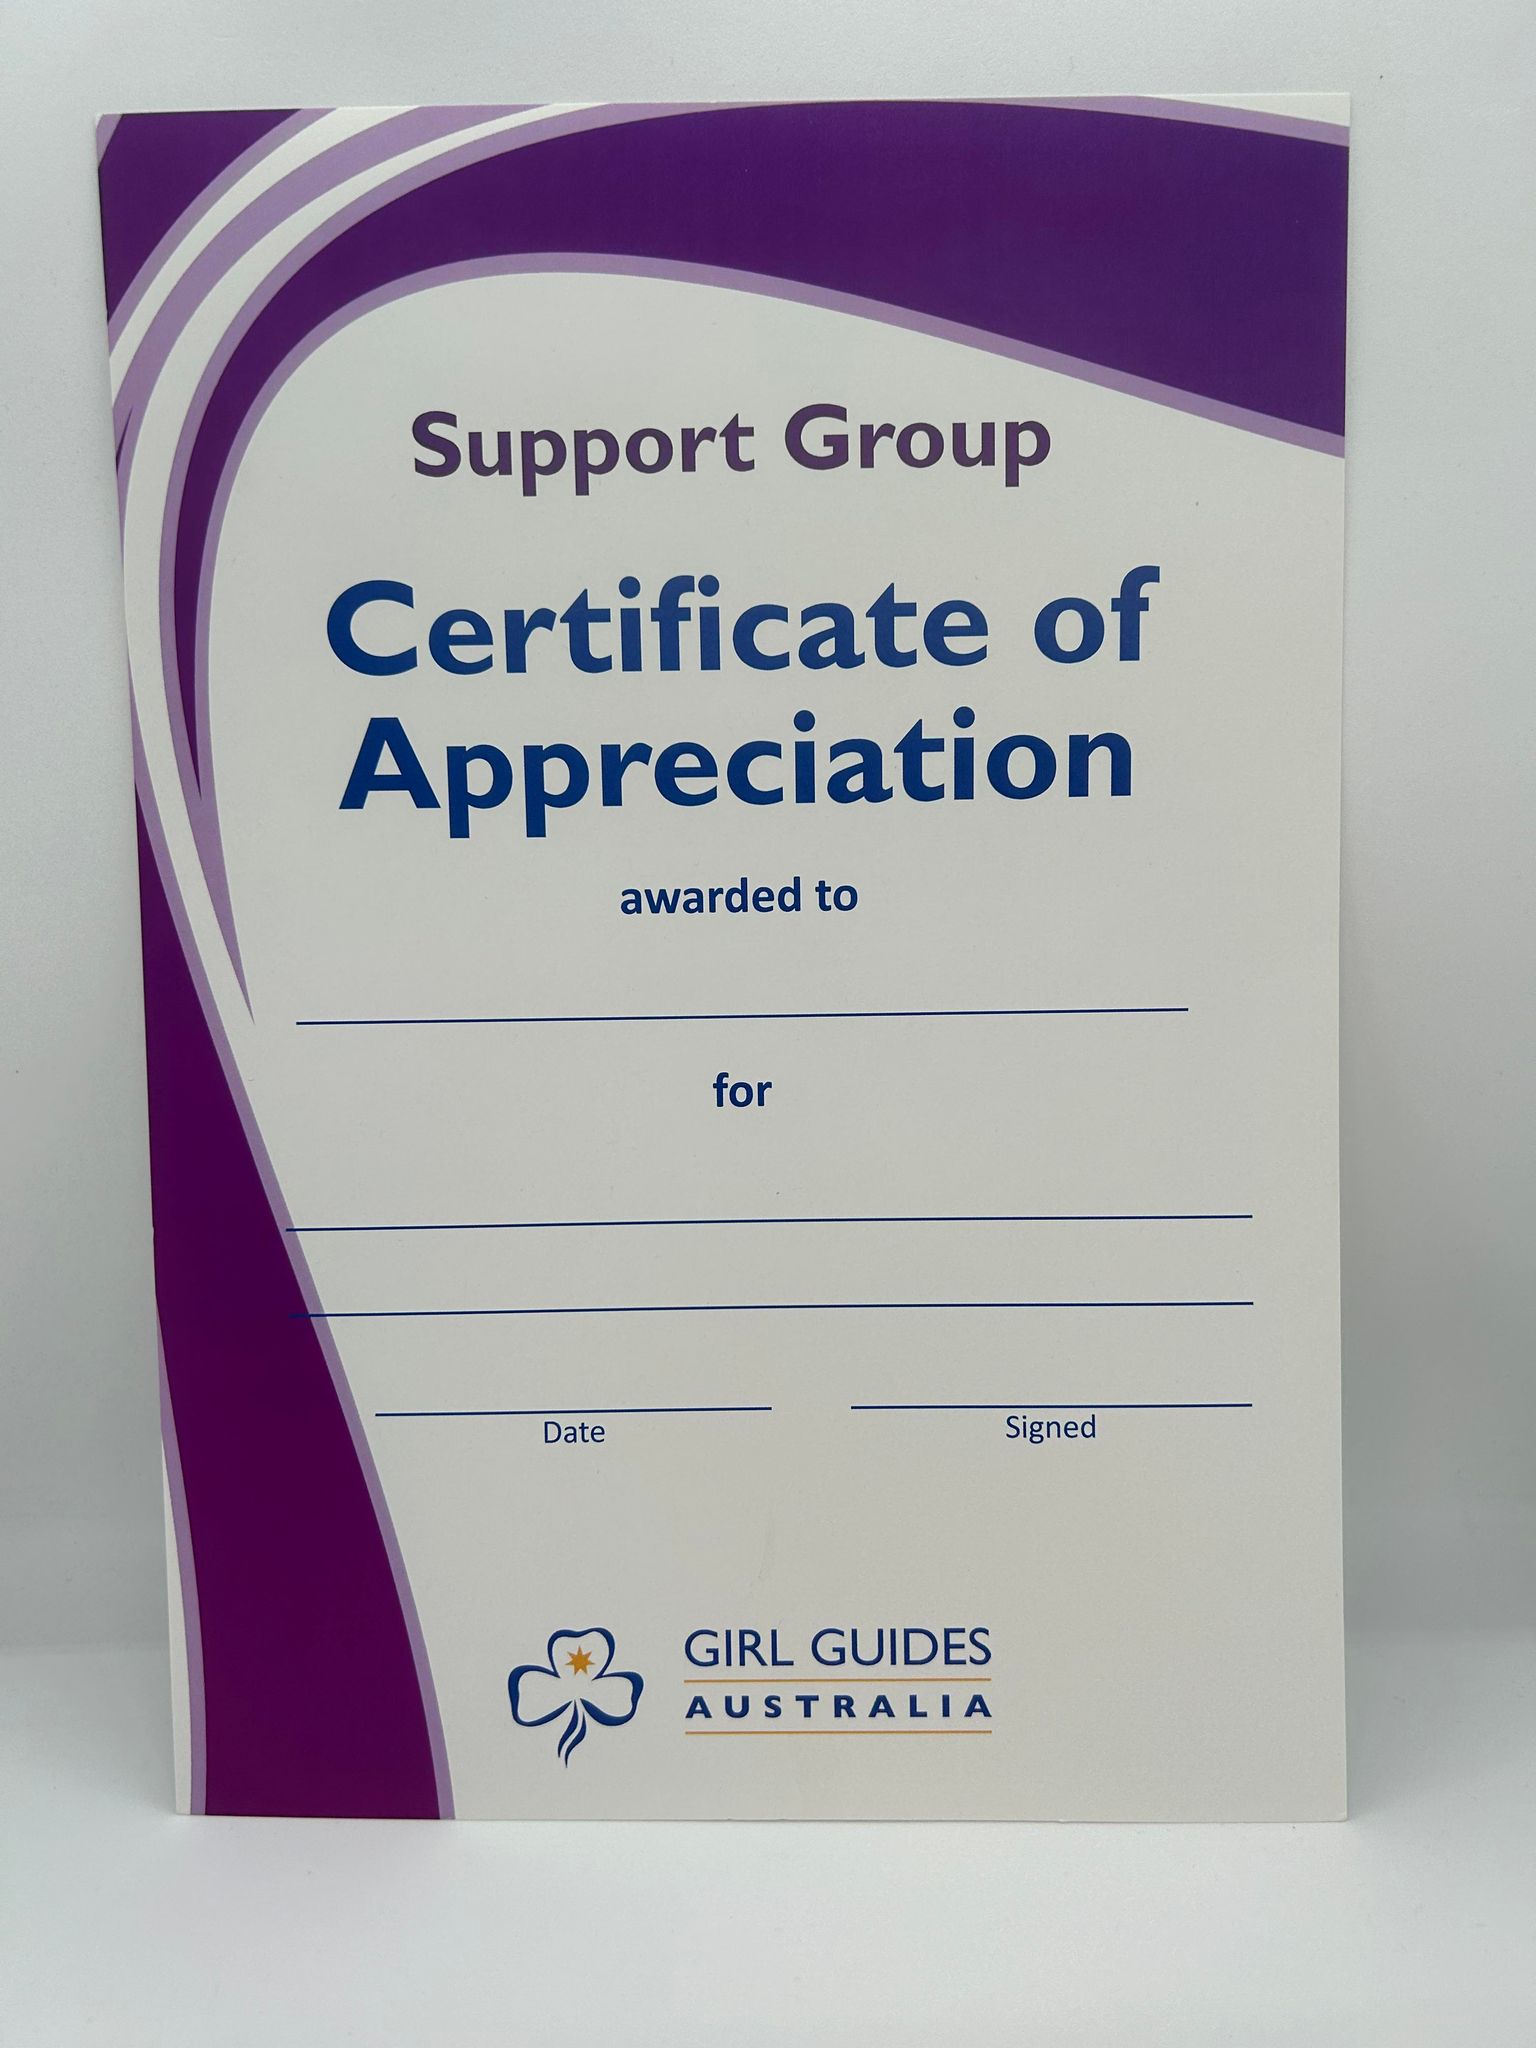 an A4 certificate of appreciation from the support group with purple swirls